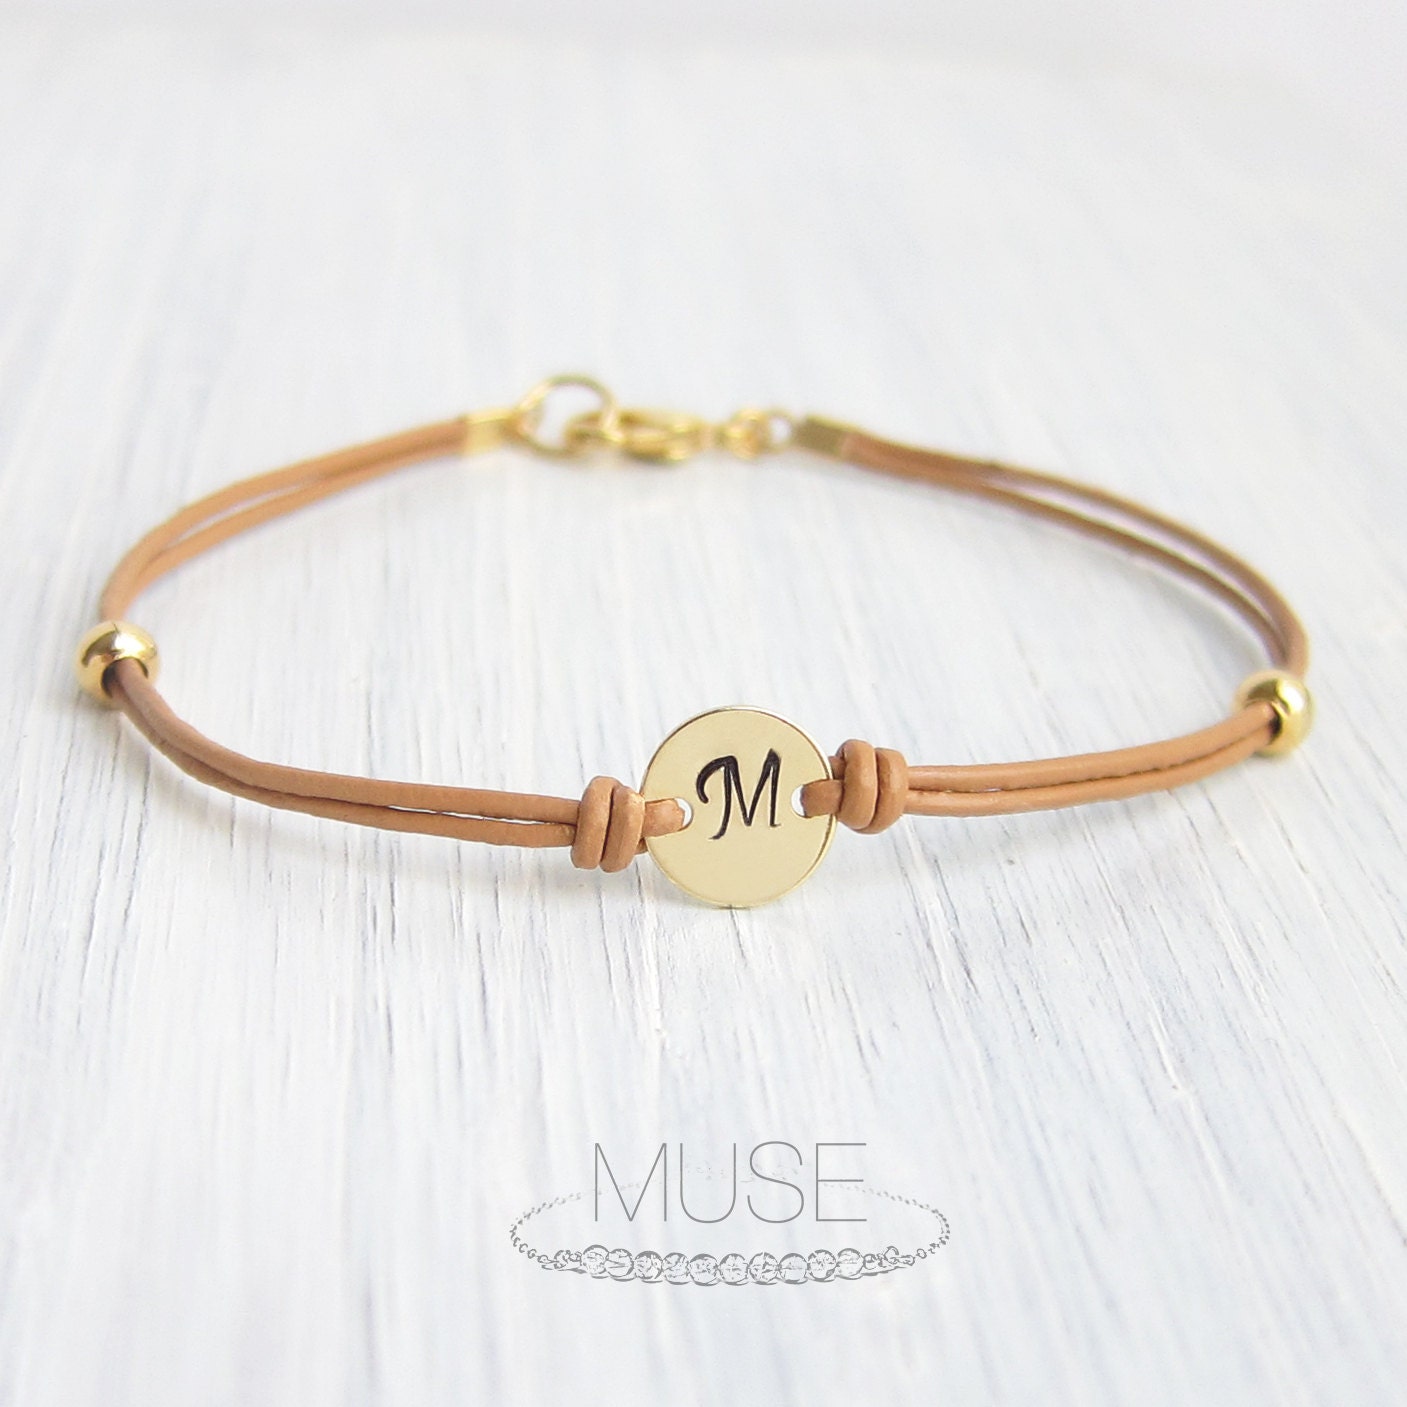 Monogram Leather Bracelet Personalized Initial by MuseByLAM